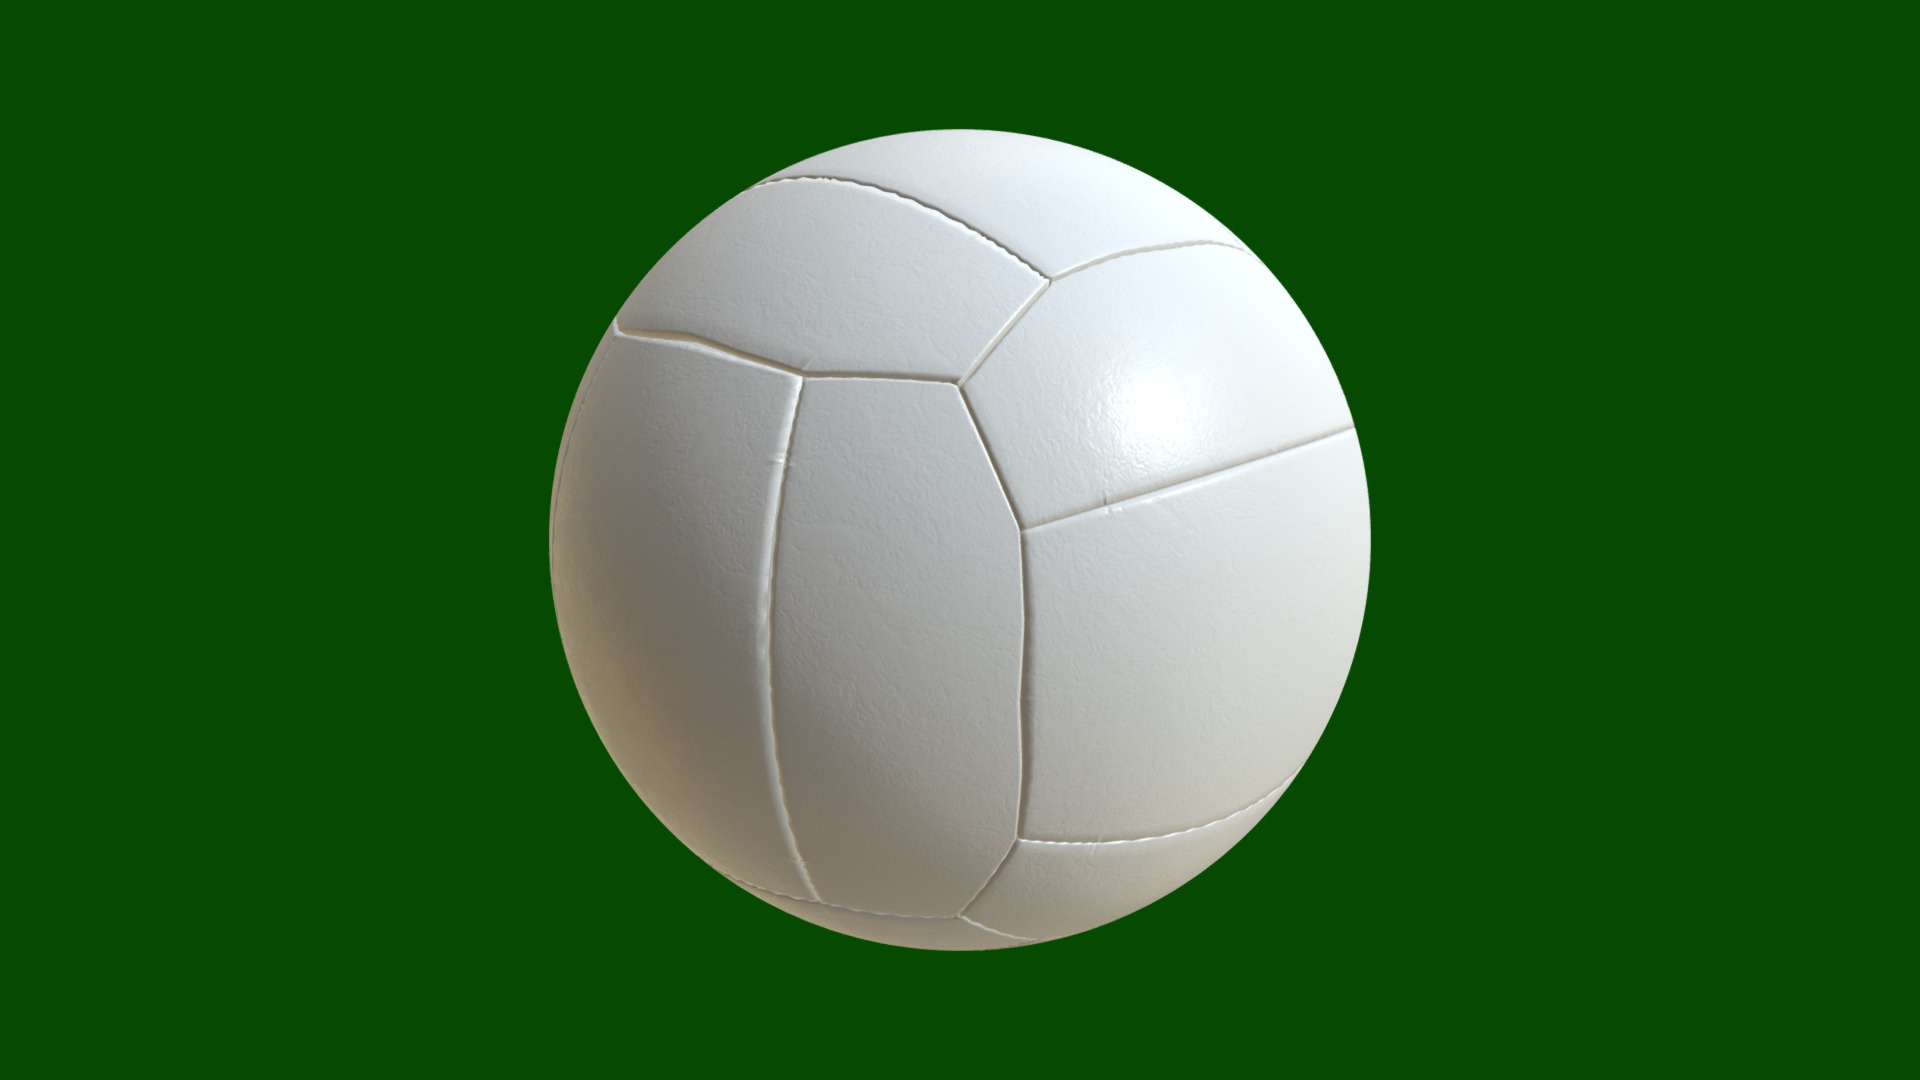 3D model Gaelic football - This is a 3D model of the Gaelic football. The 3D model is about a white football ball.